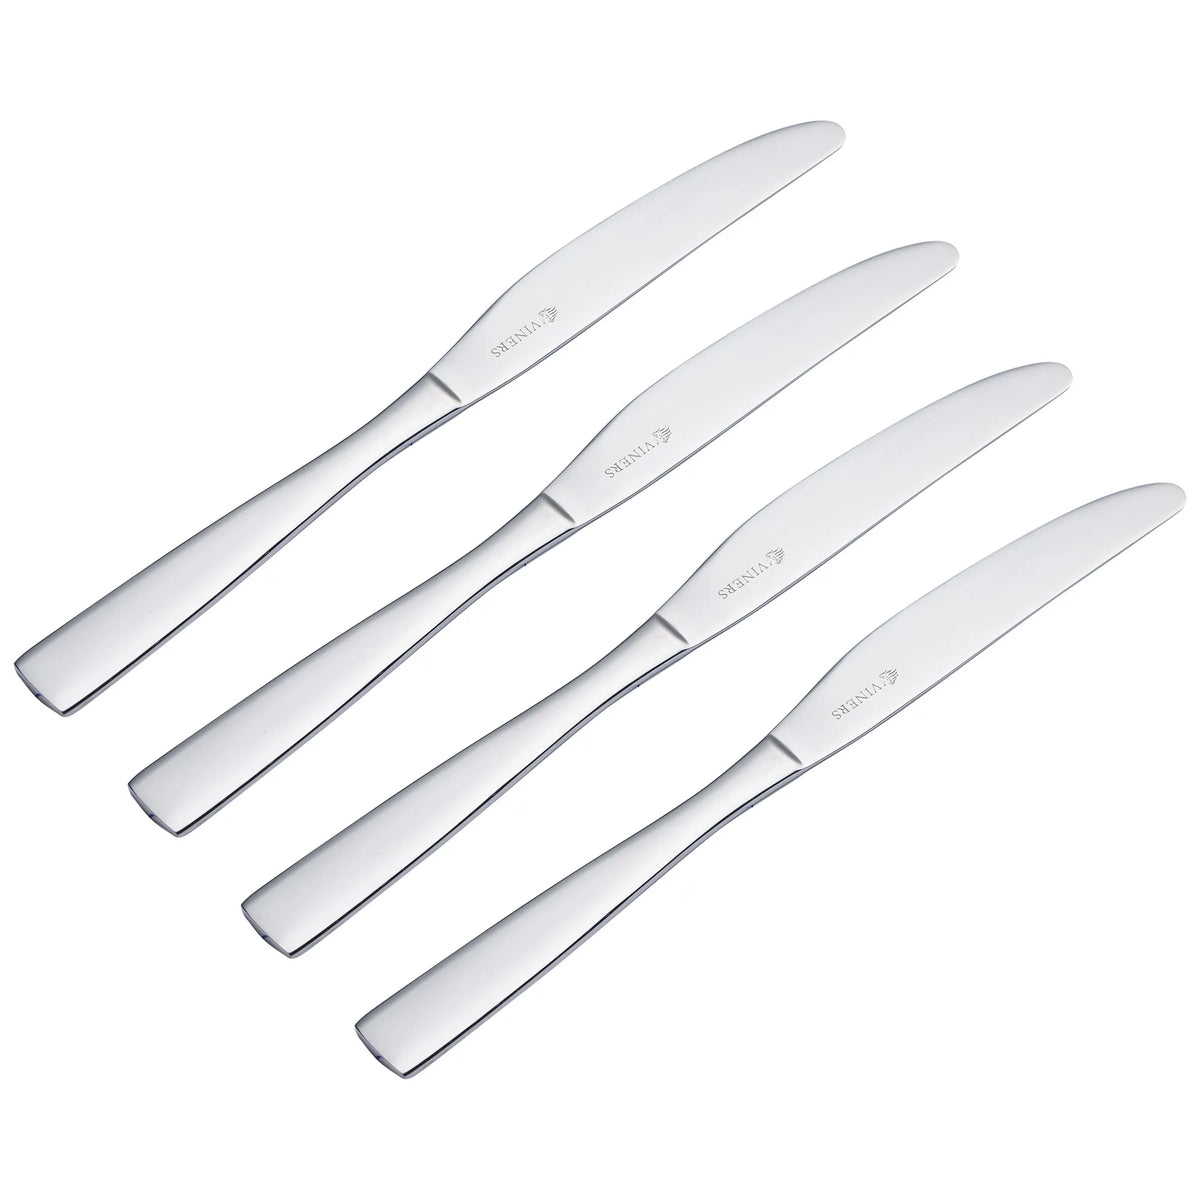 Viners Purity 4 Piece Table Knife